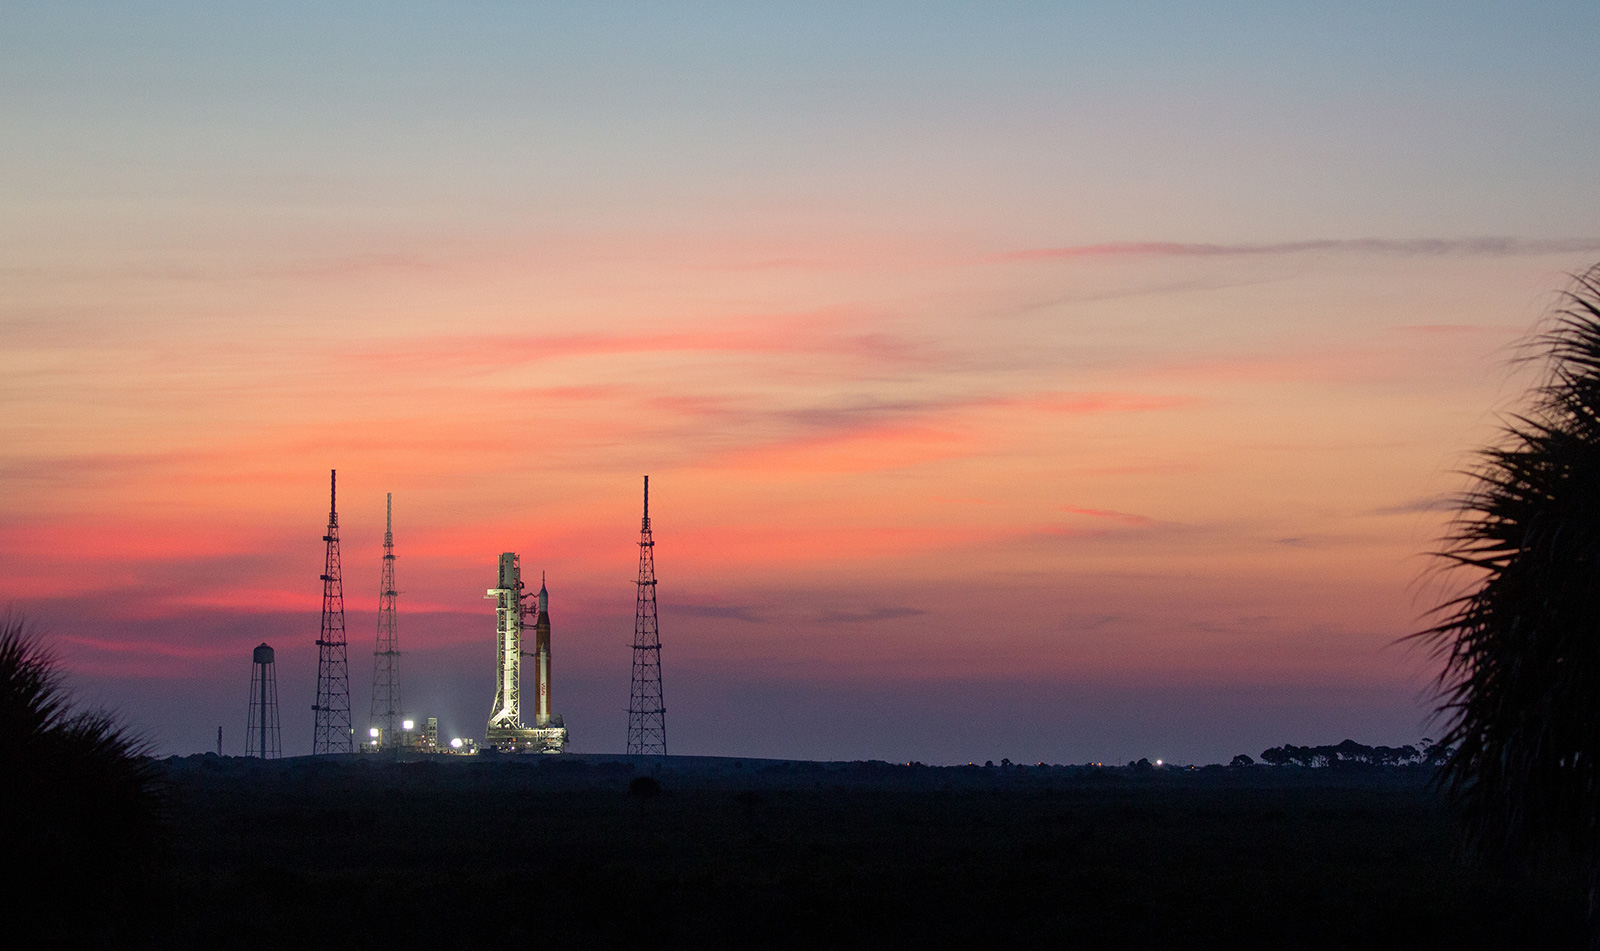 NASA’s Space Launch System (SLS) rocket with the Orion spacecraft aboard is seen at sunrise atop ...